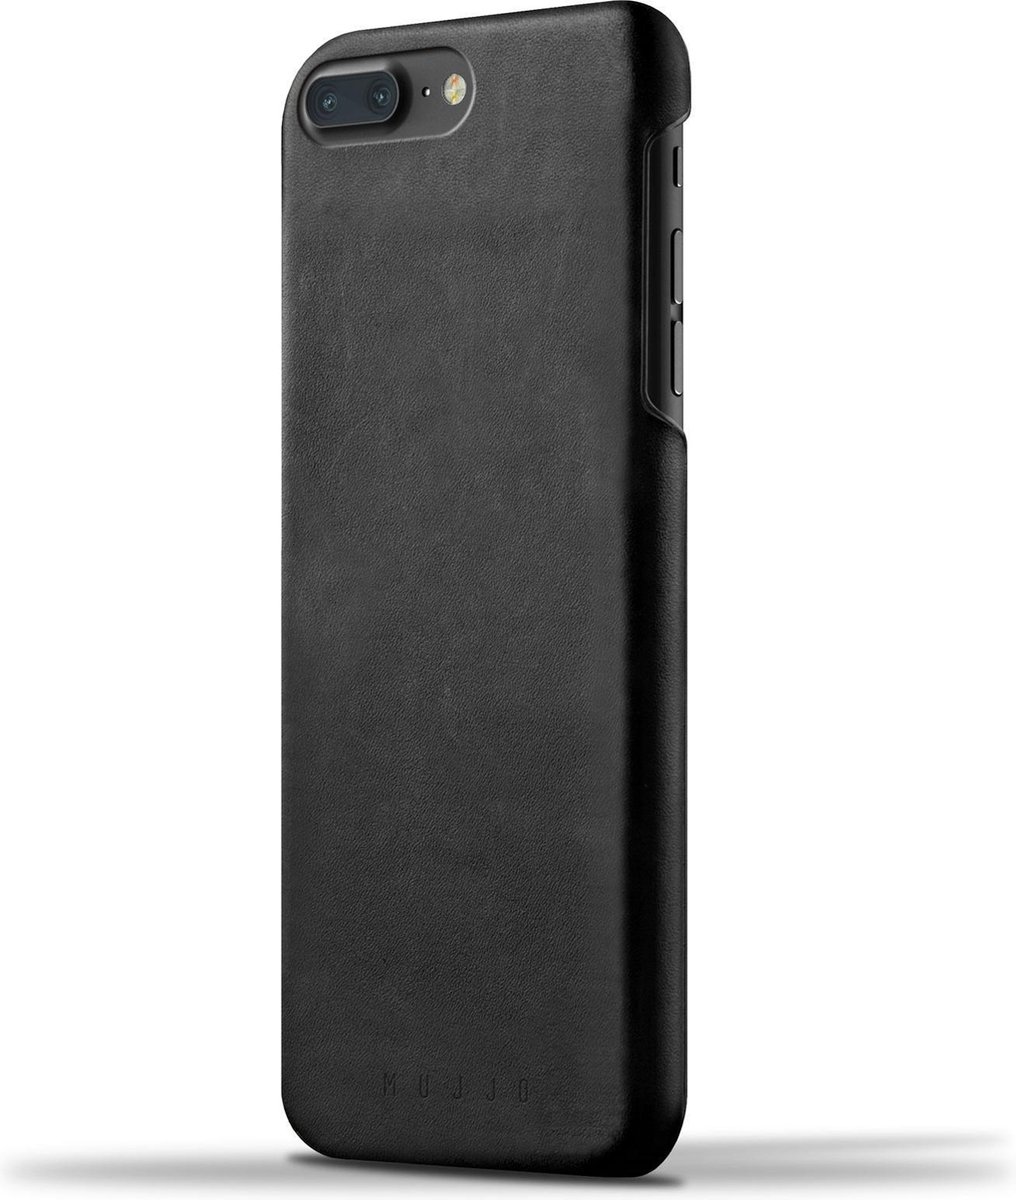 Mujjo Leather Case for iPhone 7+ Black